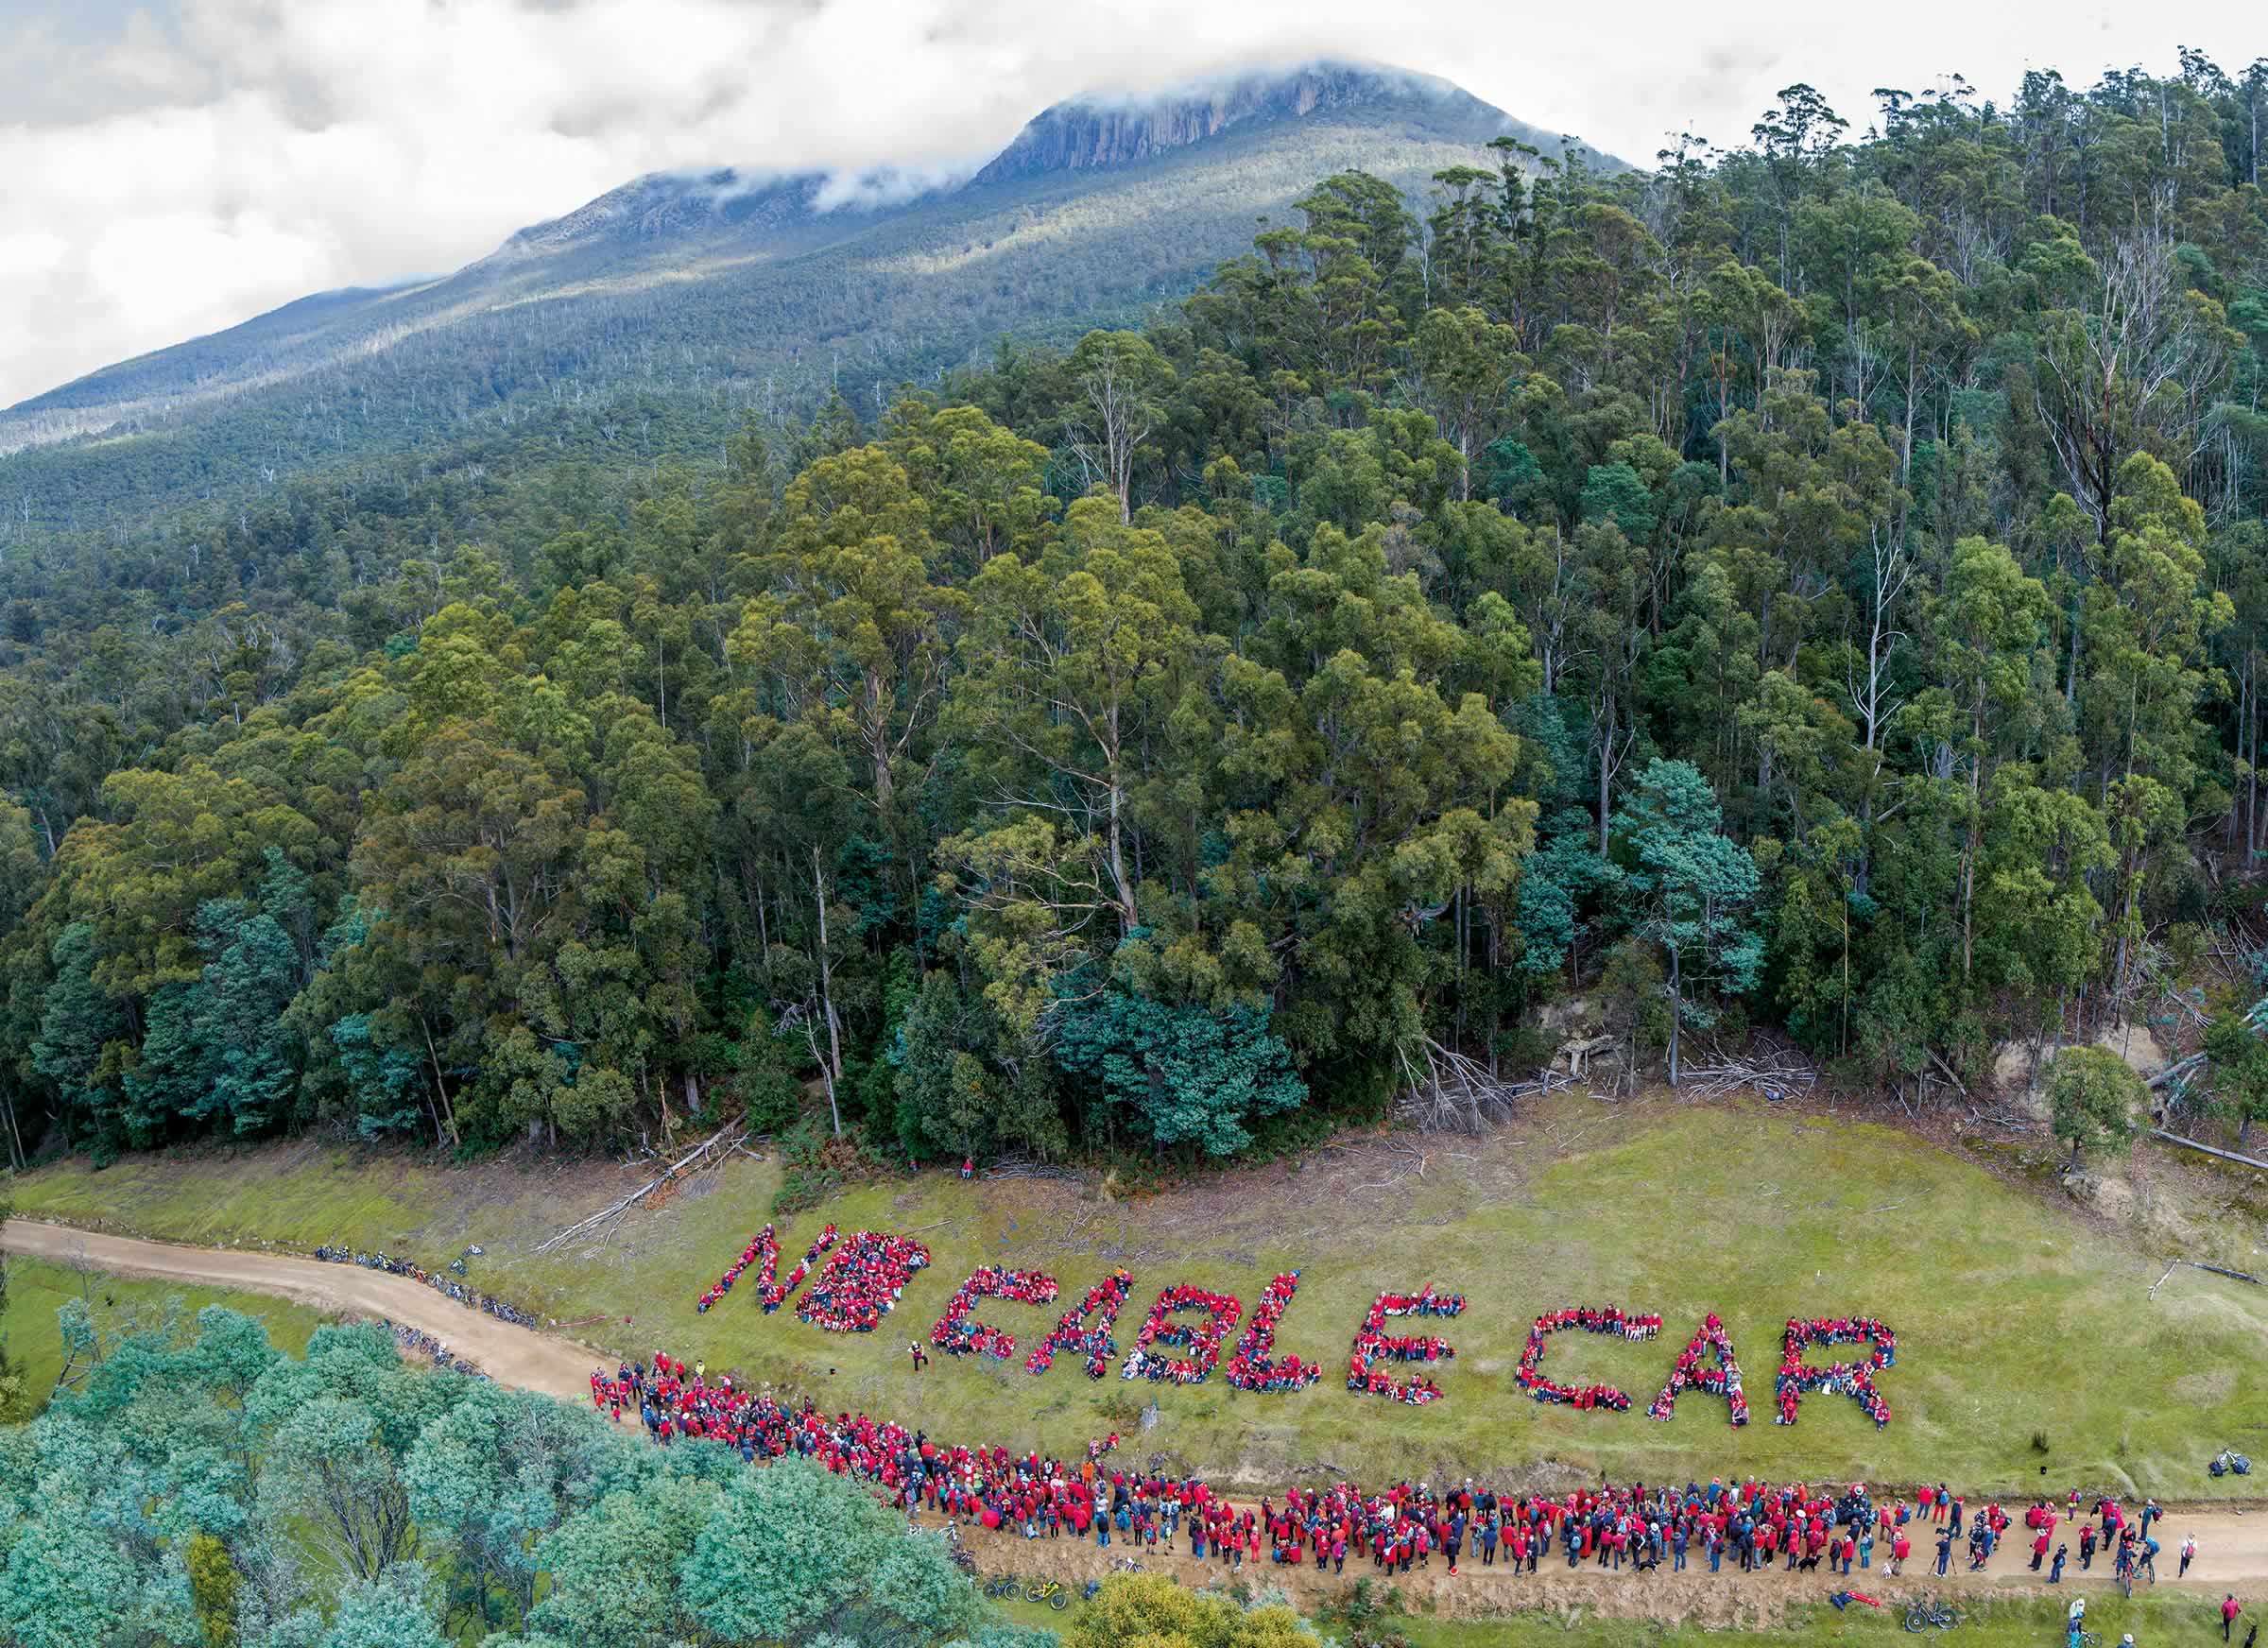 Photo from the air of a protest in which people dressed in red form the words “No Cable Car” against a grass hillside, with the forest and mountain in the background.